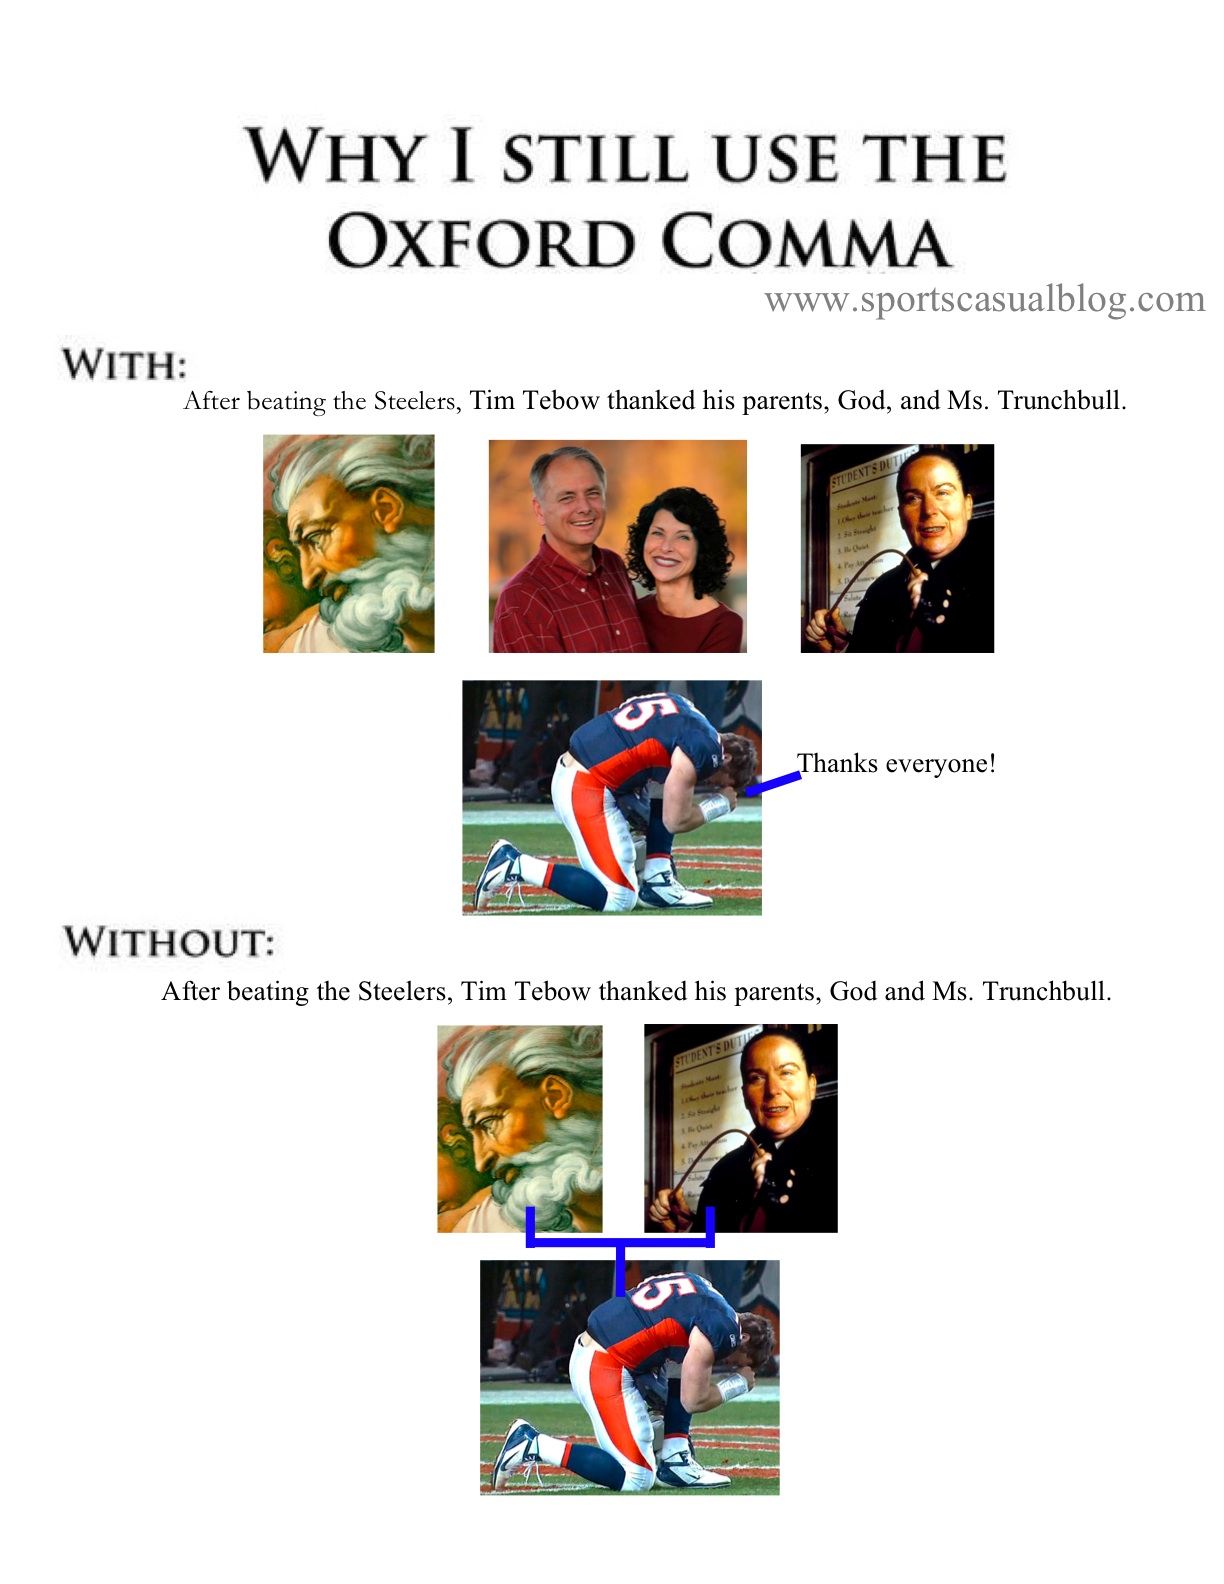 Sports Casual: Why I Still Use the Oxford Comma